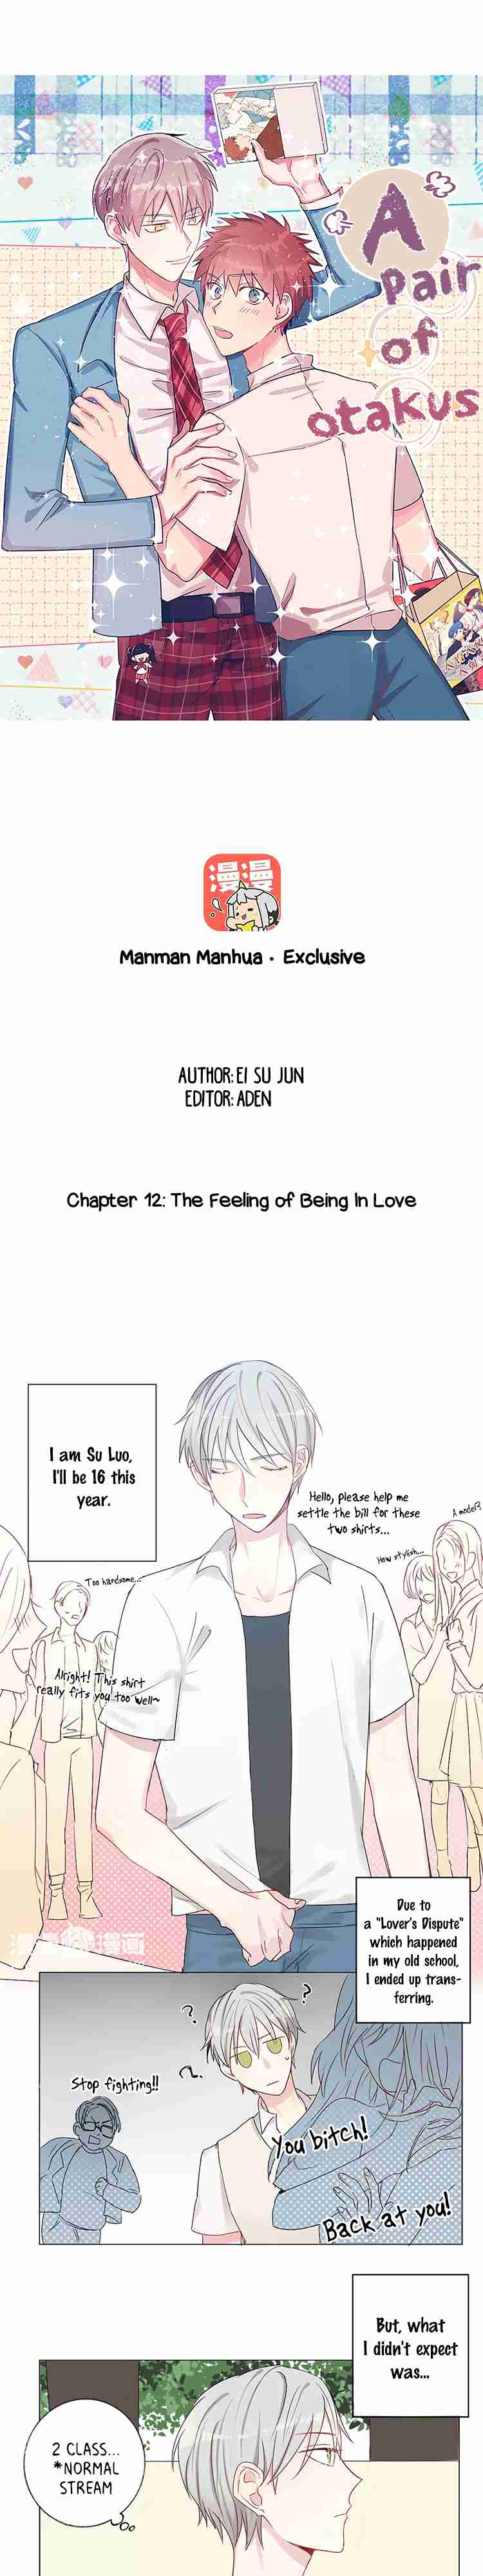 A Pair of Otakus Ch. 12 The Feeling of Being In Love